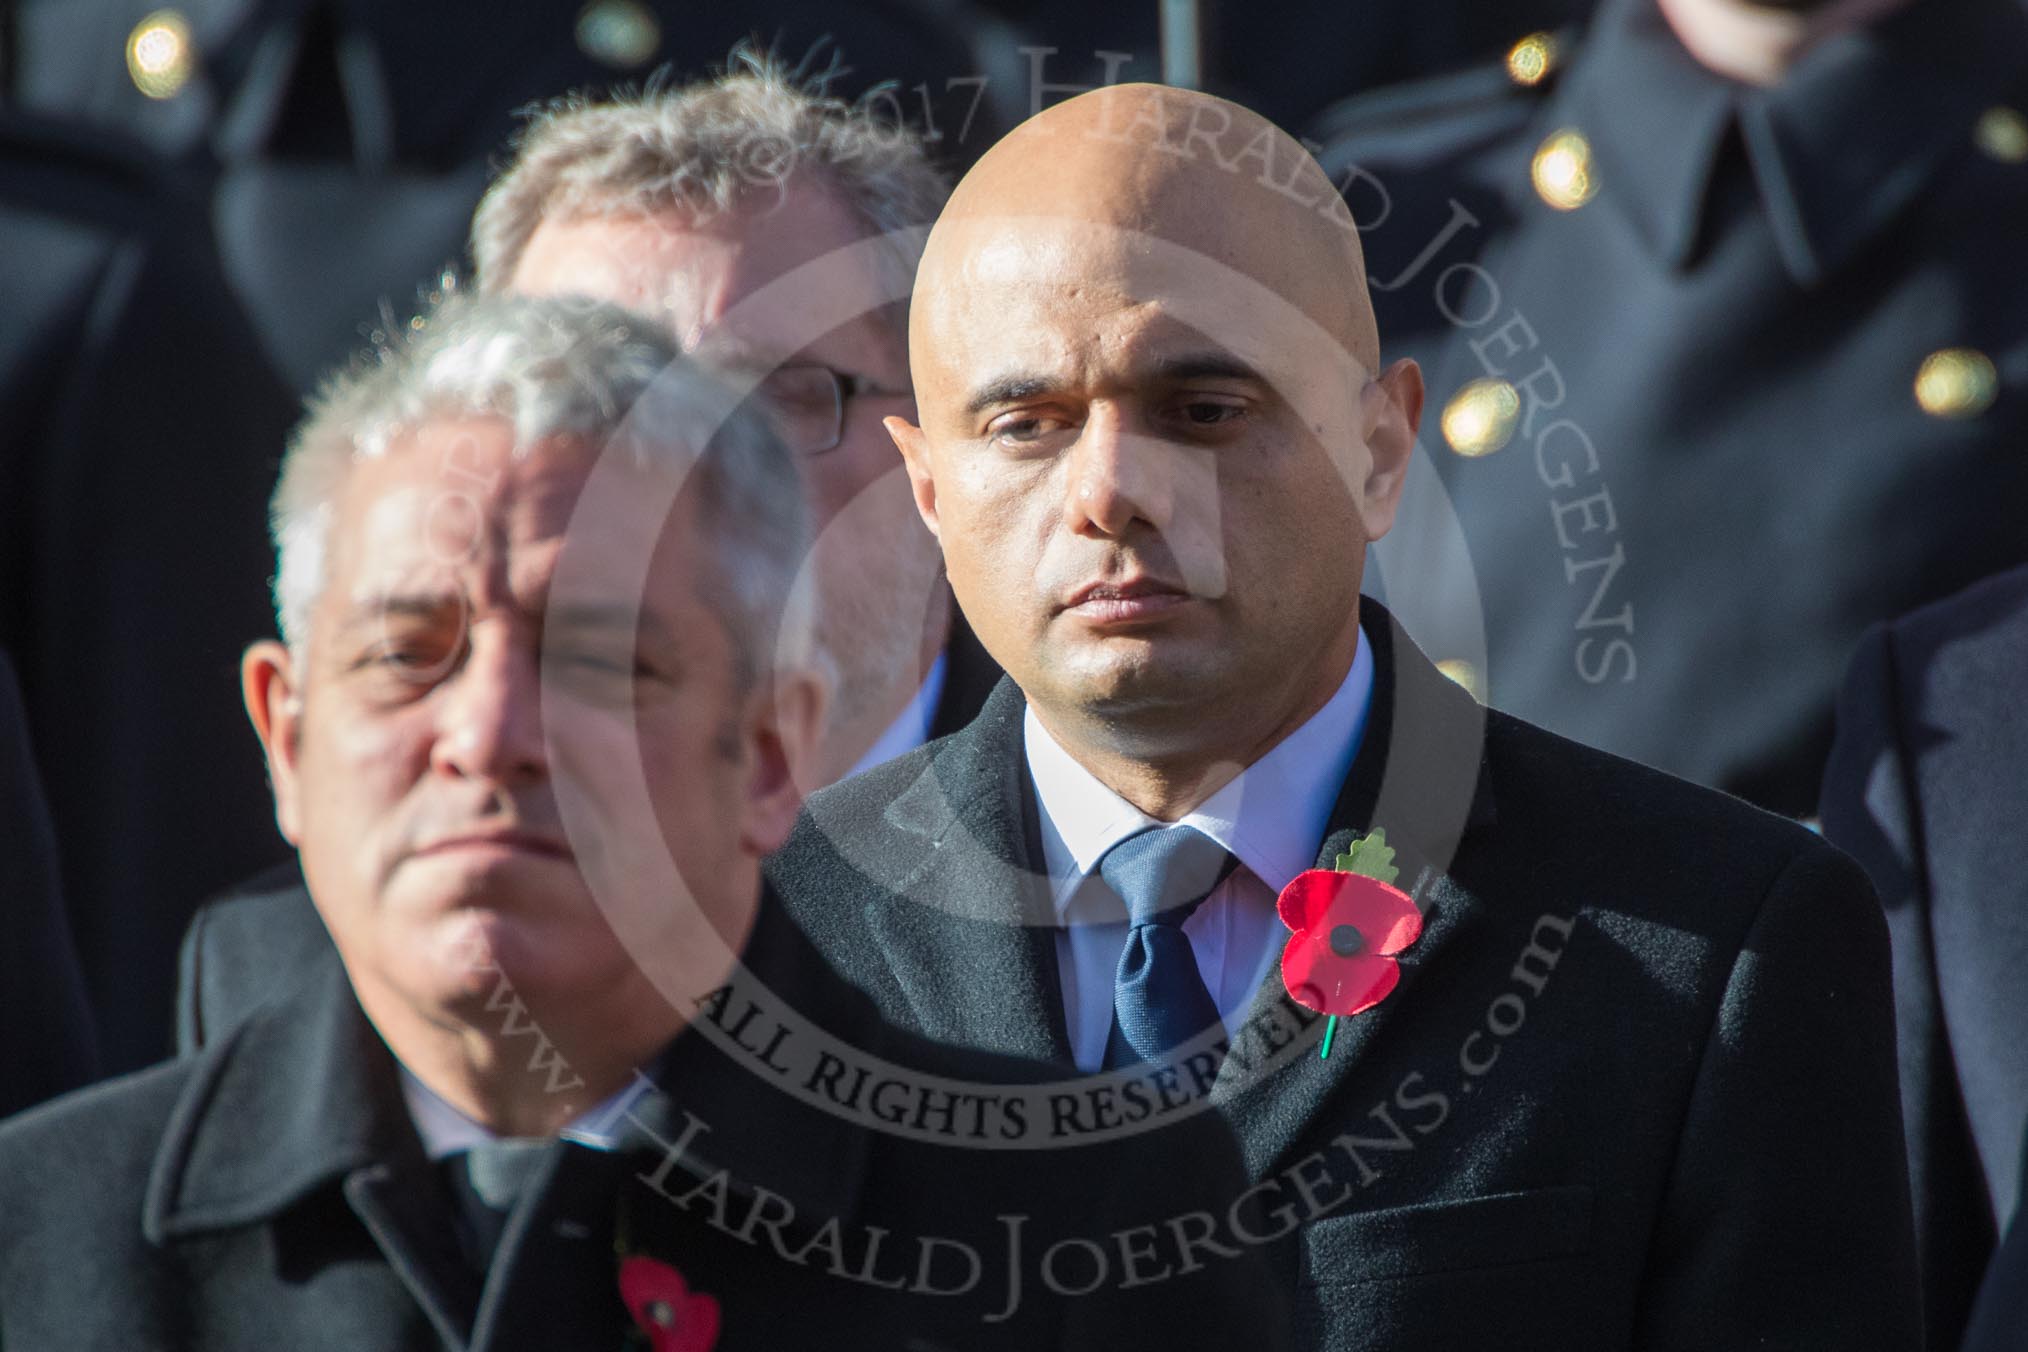 The Rt Hon Sajid Javid MP (Secretary of State for the Home Department) during Remembrance Sunday Cenotaph Ceremony 2018 at Horse Guards Parade, Westminster, London, 11 November 2018, 11:03.